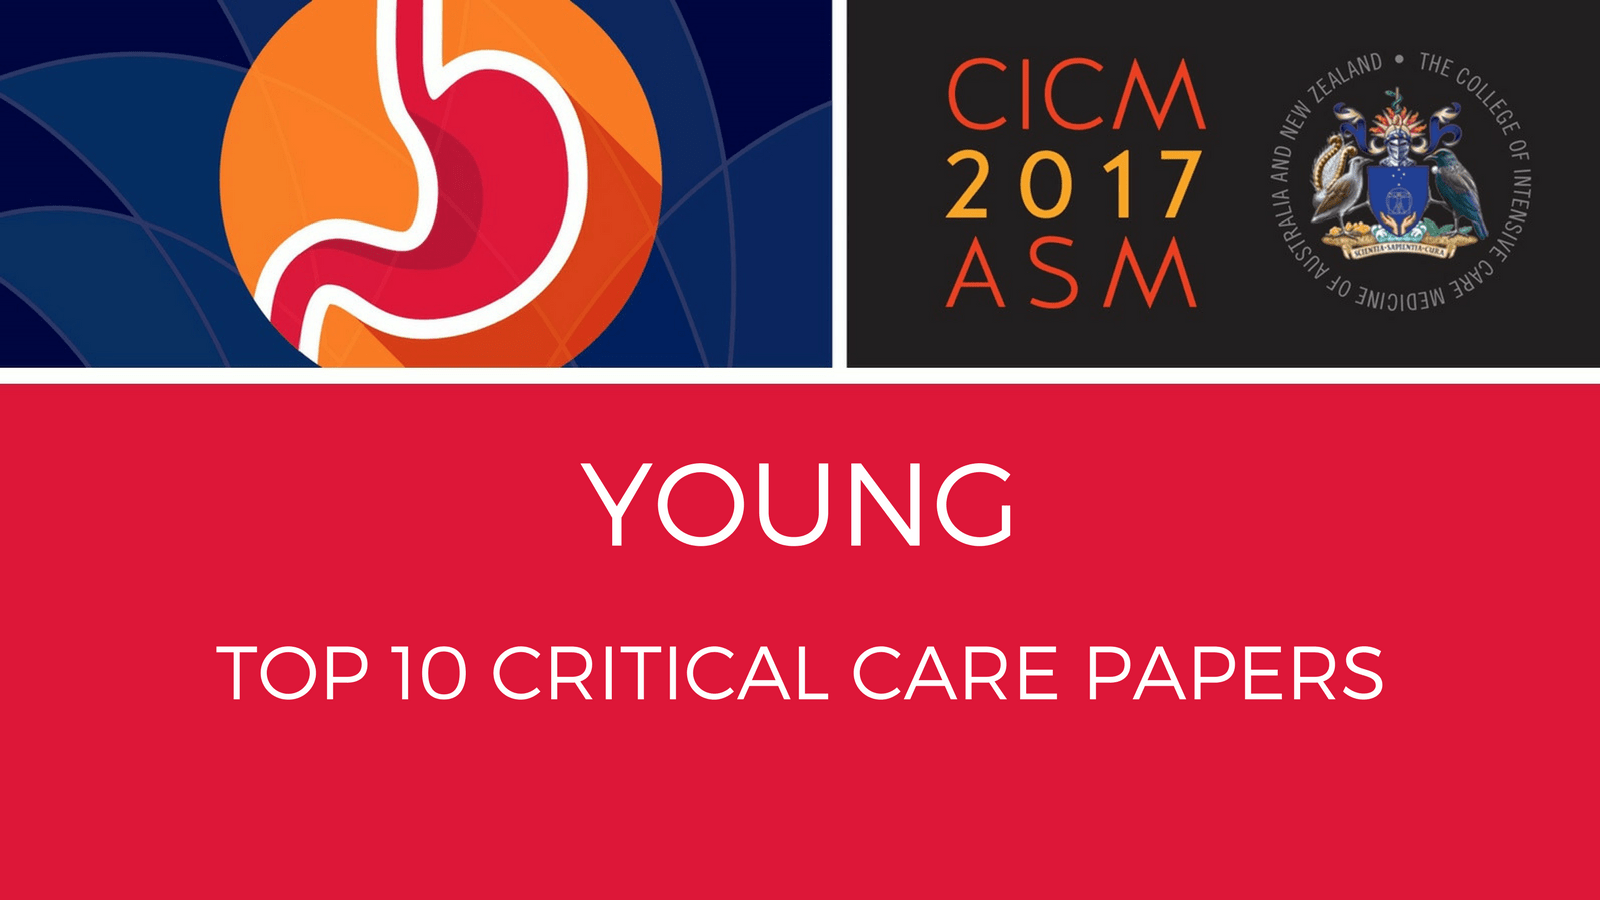 Top 10 Critical Care Papers